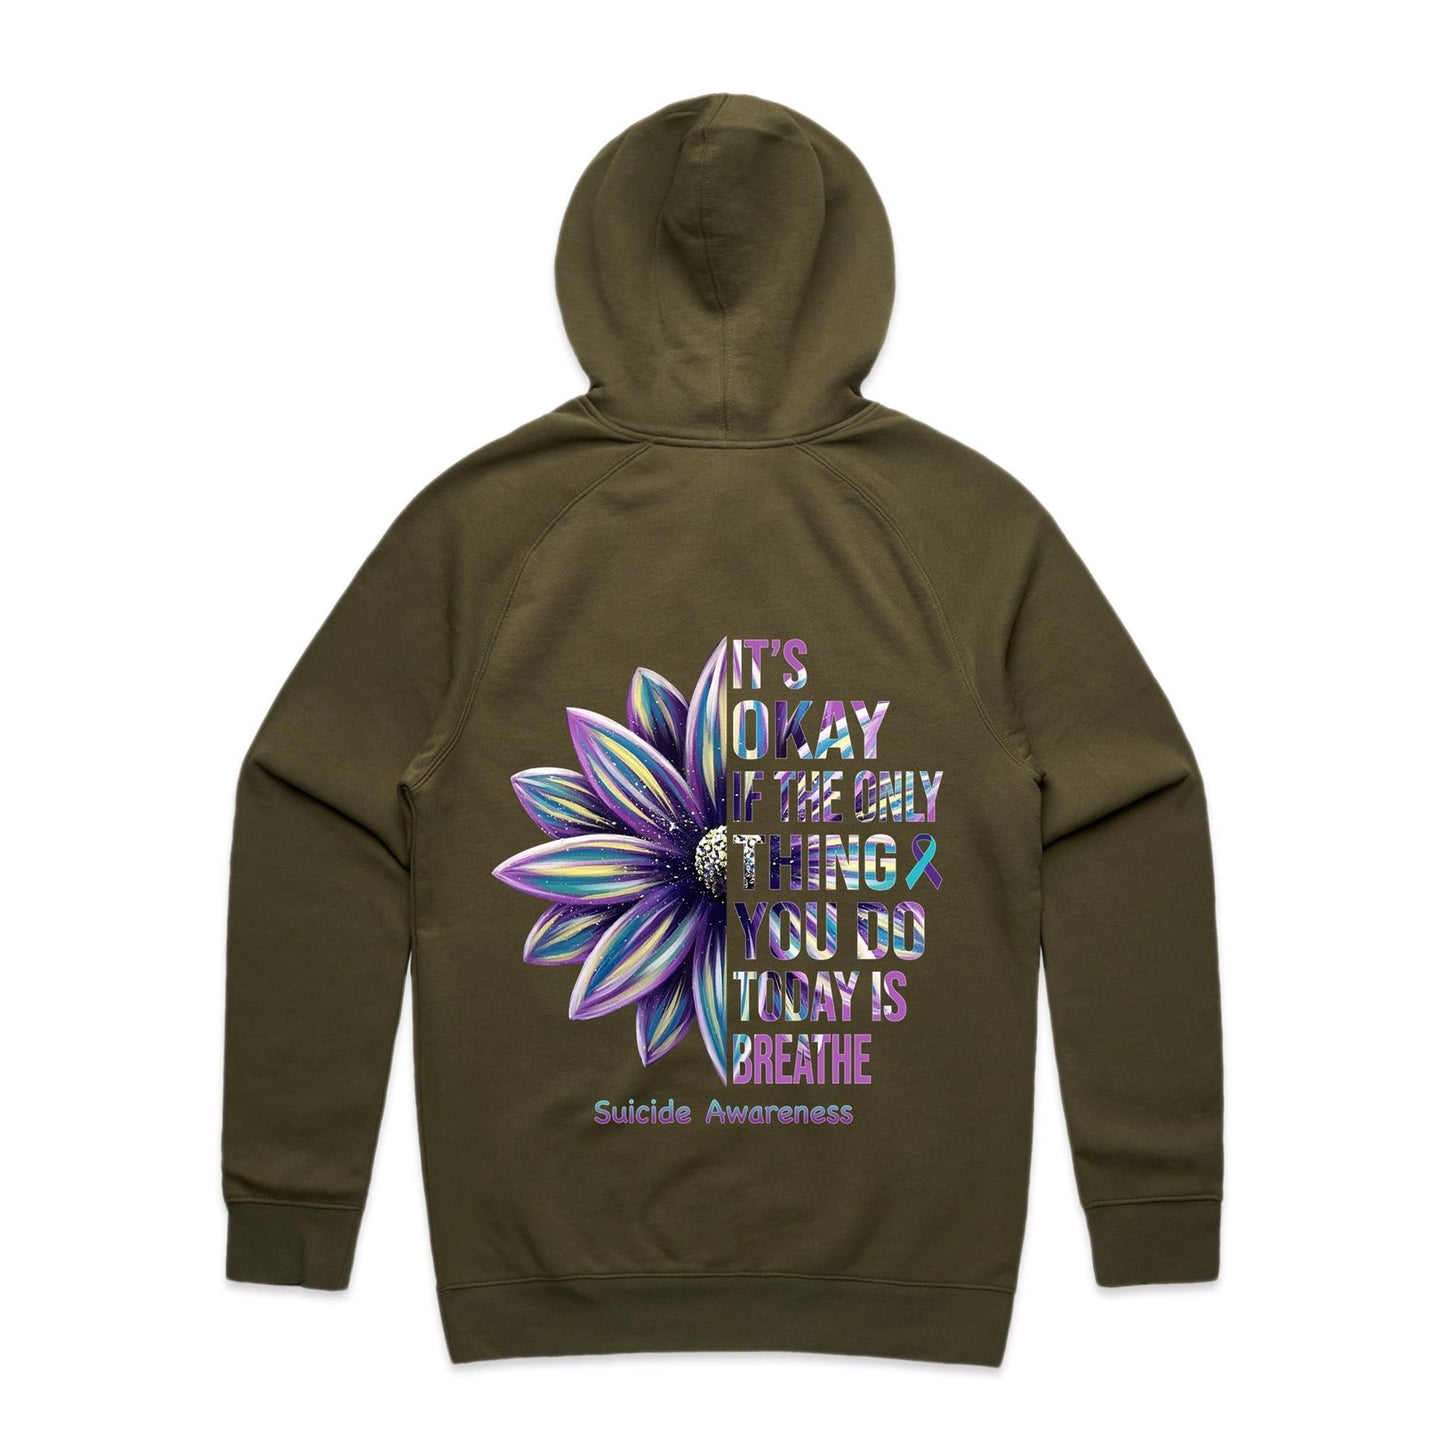 Unisex Hoodie - Its ok if the only thing